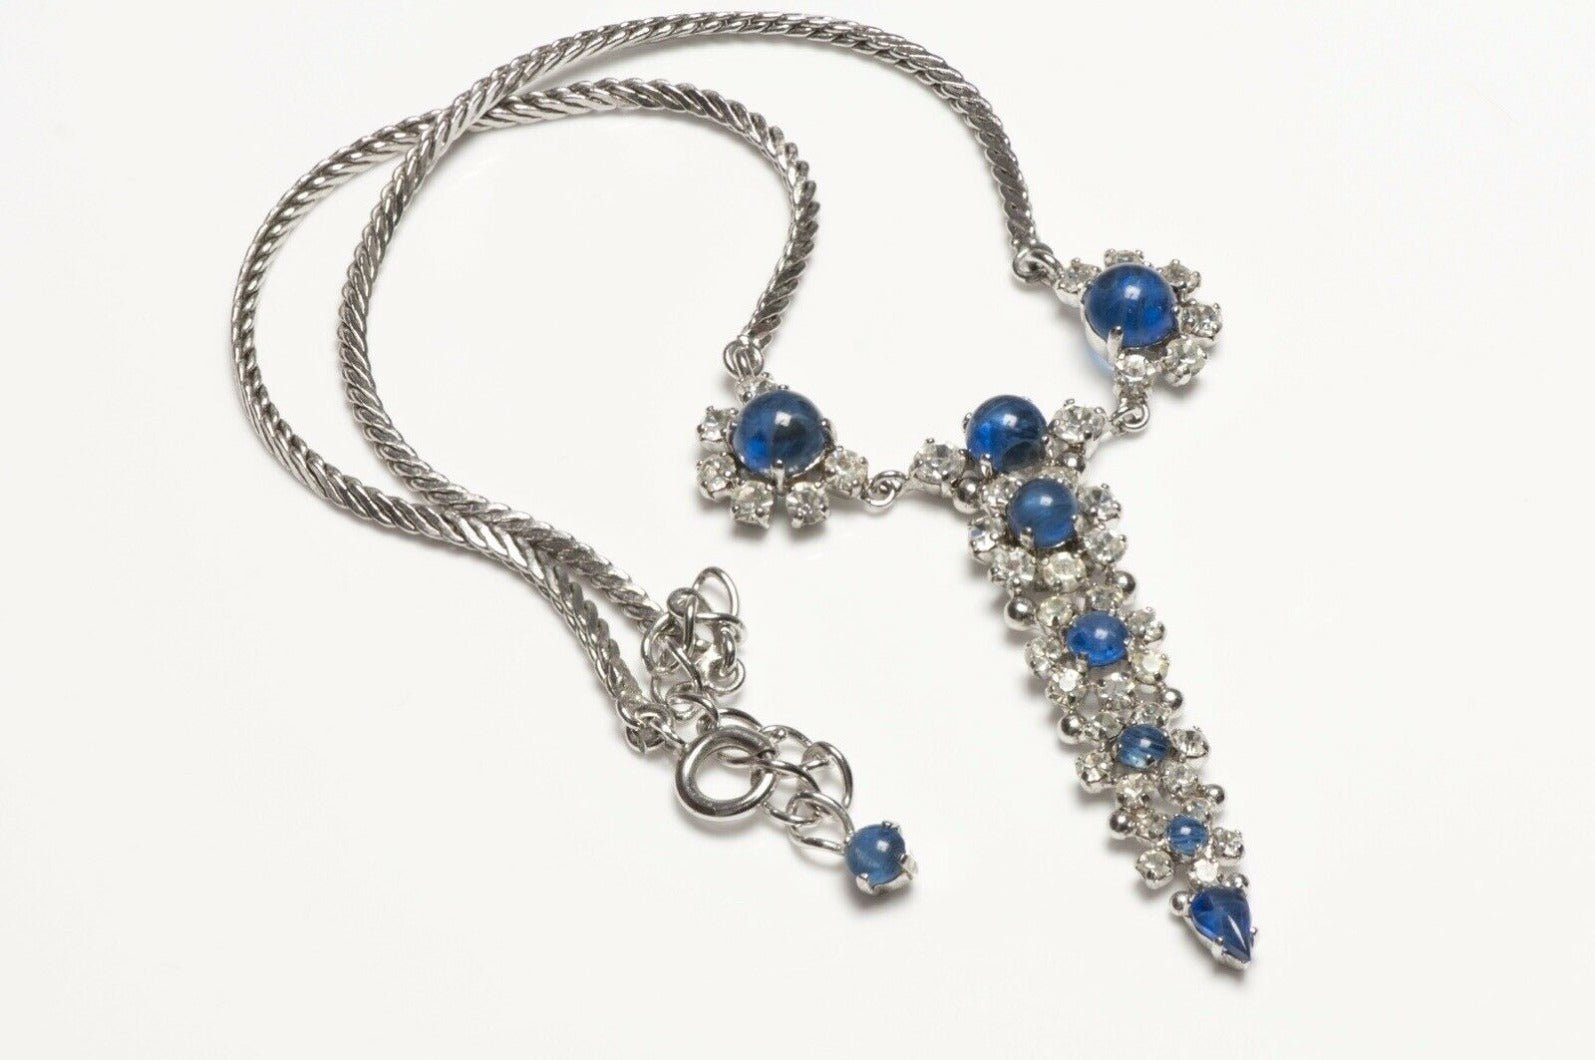 Christian Dior 1973 Henkel & Grosse Blue Cabochon Glass Crystal Necklace - DSF Antique Jewelry